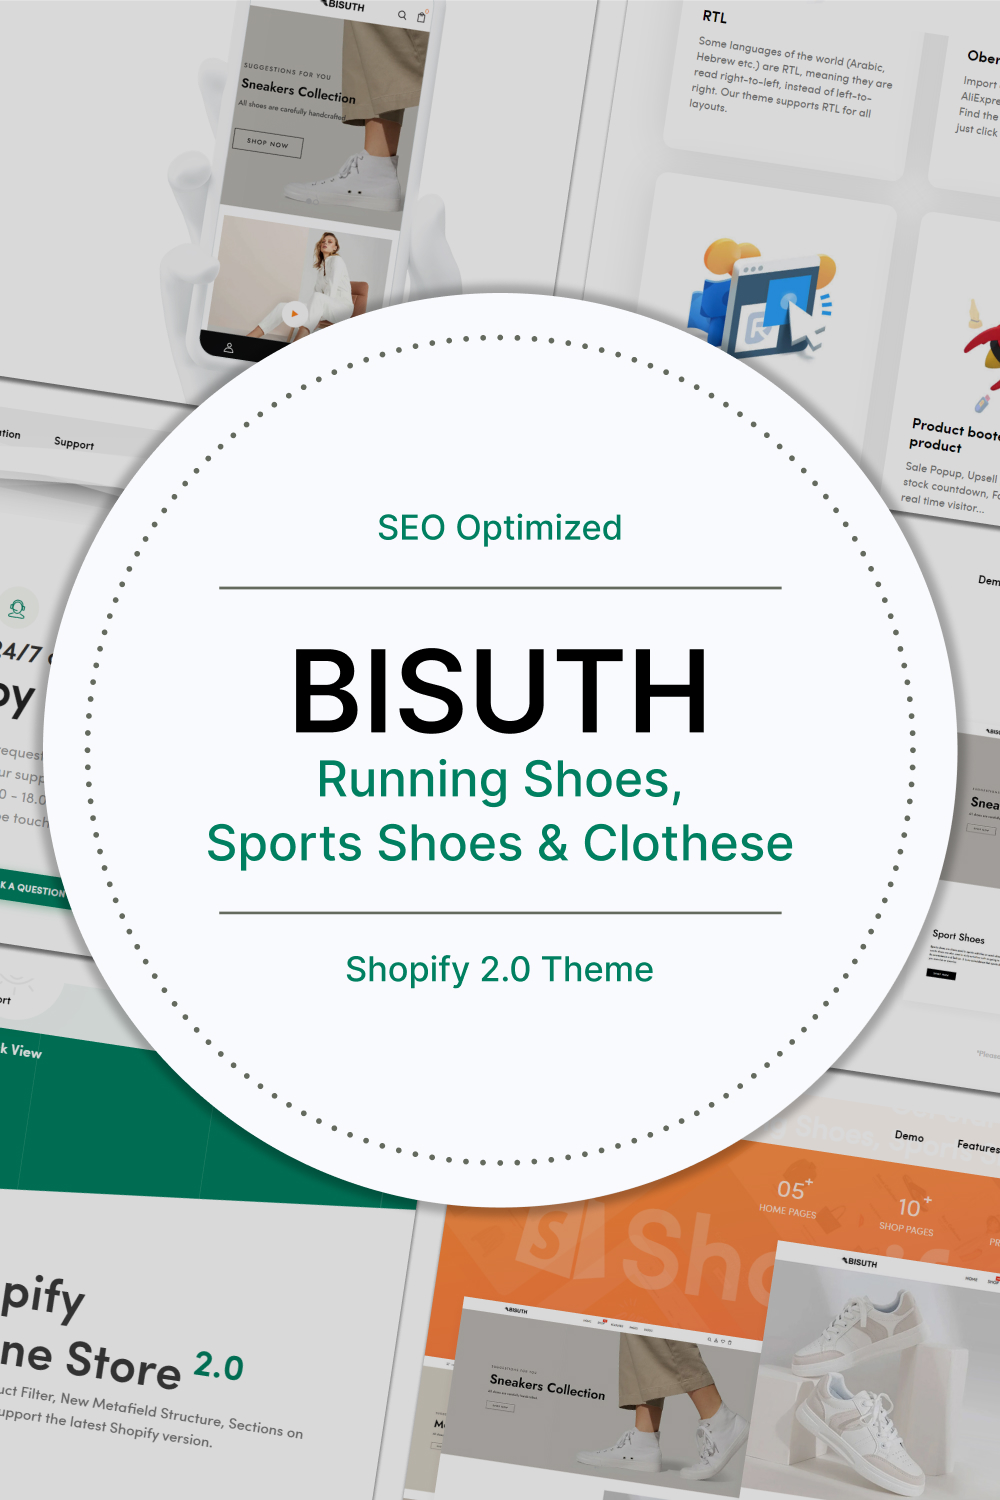 bisuth running shoes sports shoes clothes shopify 2.0 theme 02 992